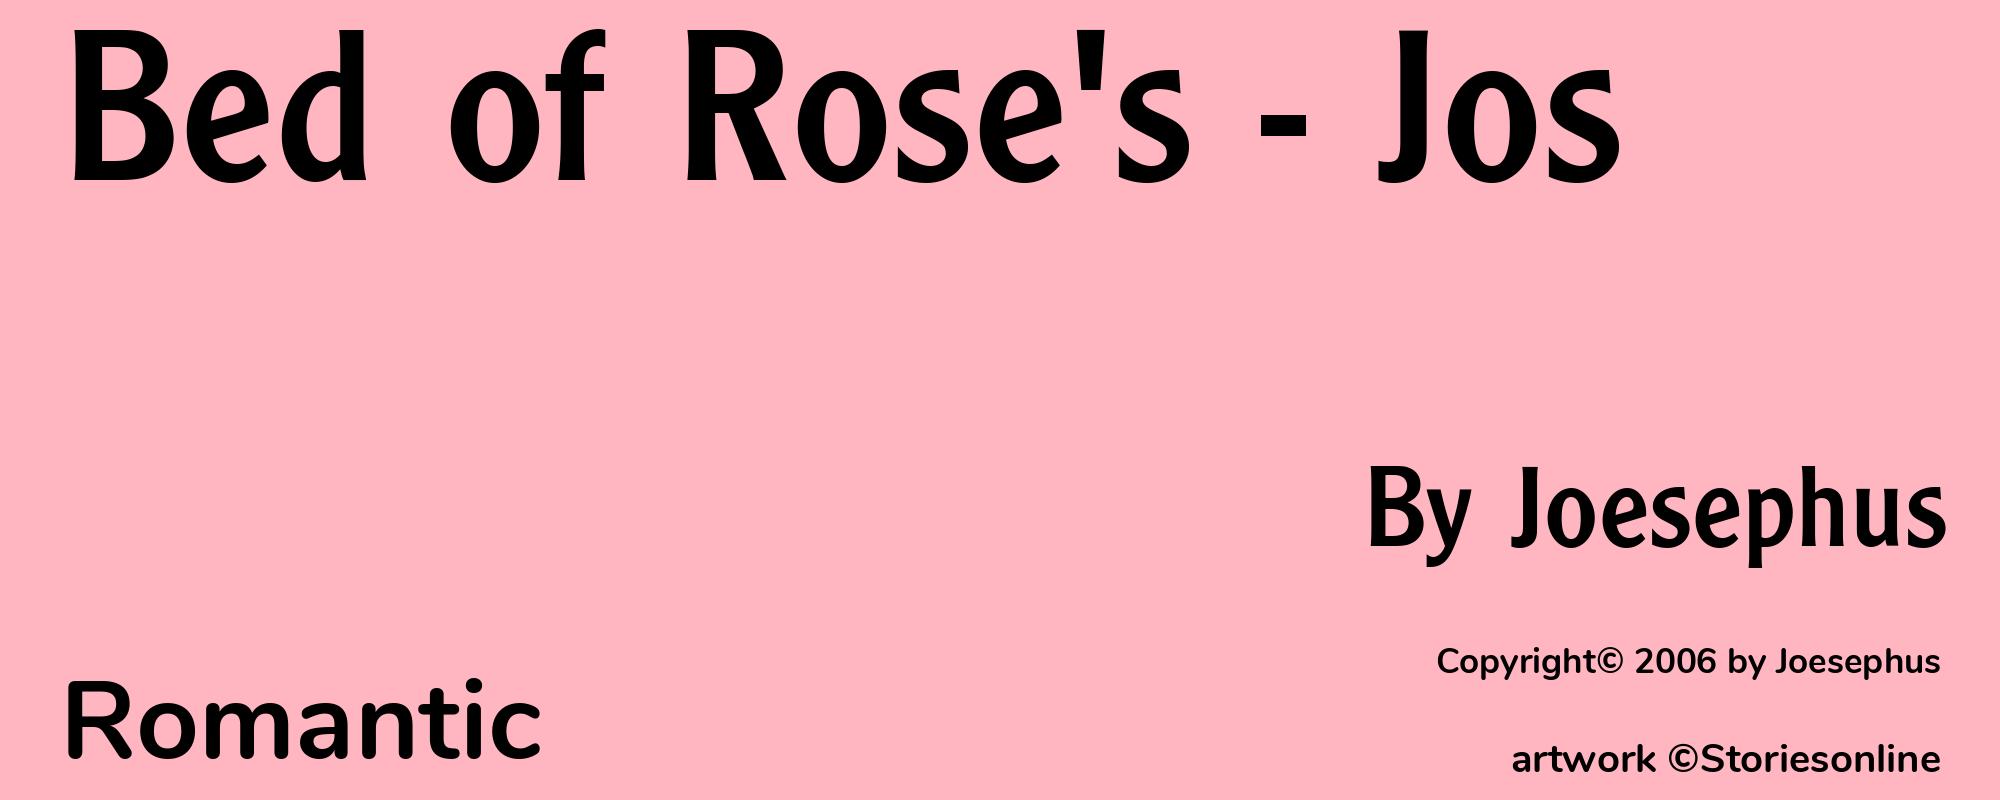 Bed of Rose's - Jos - Cover